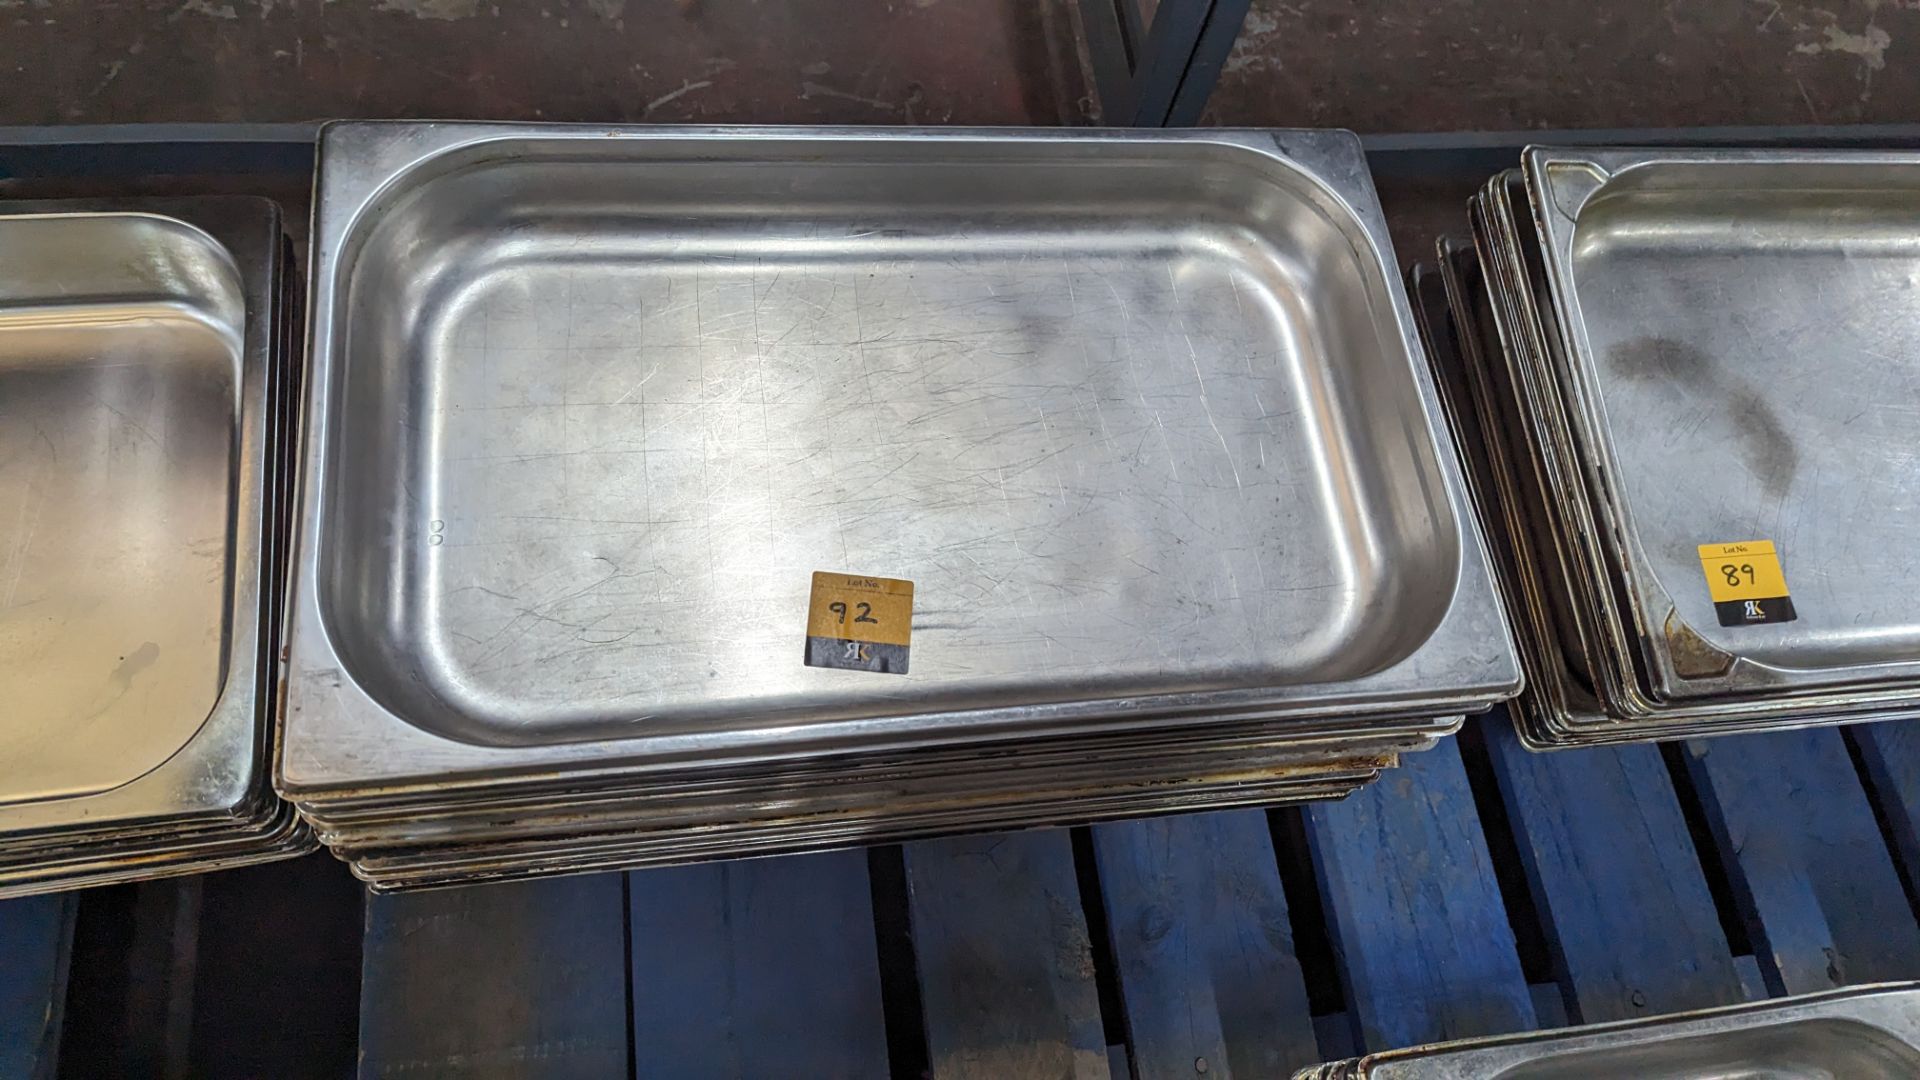 10 off stainless steel trays each measuring 530mm x 330mm x 70mm - Image 3 of 3